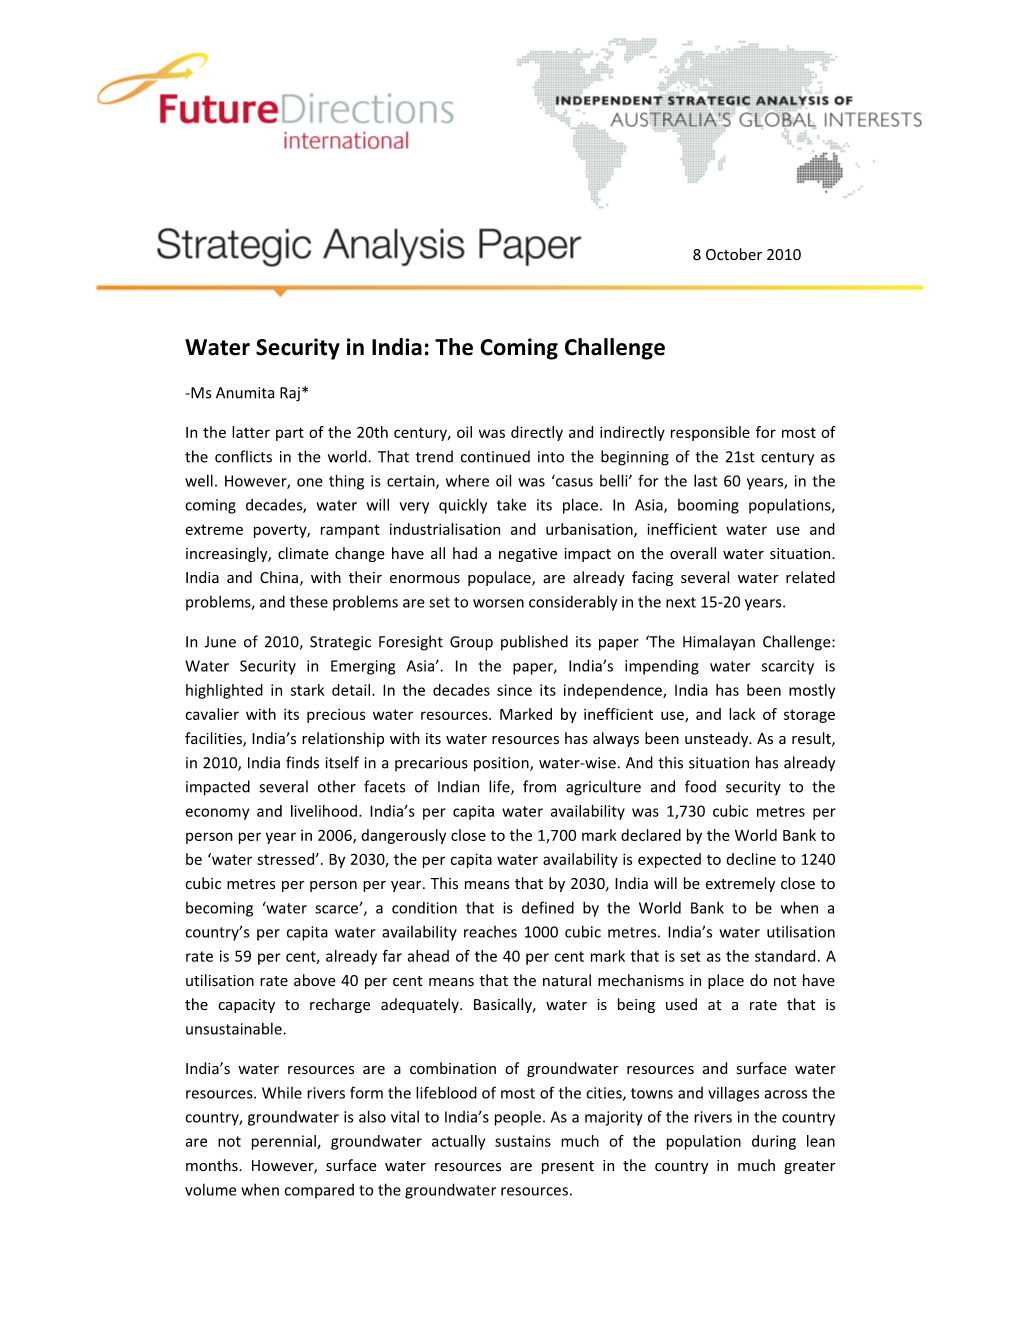 Water Security in India: the Coming Challenge